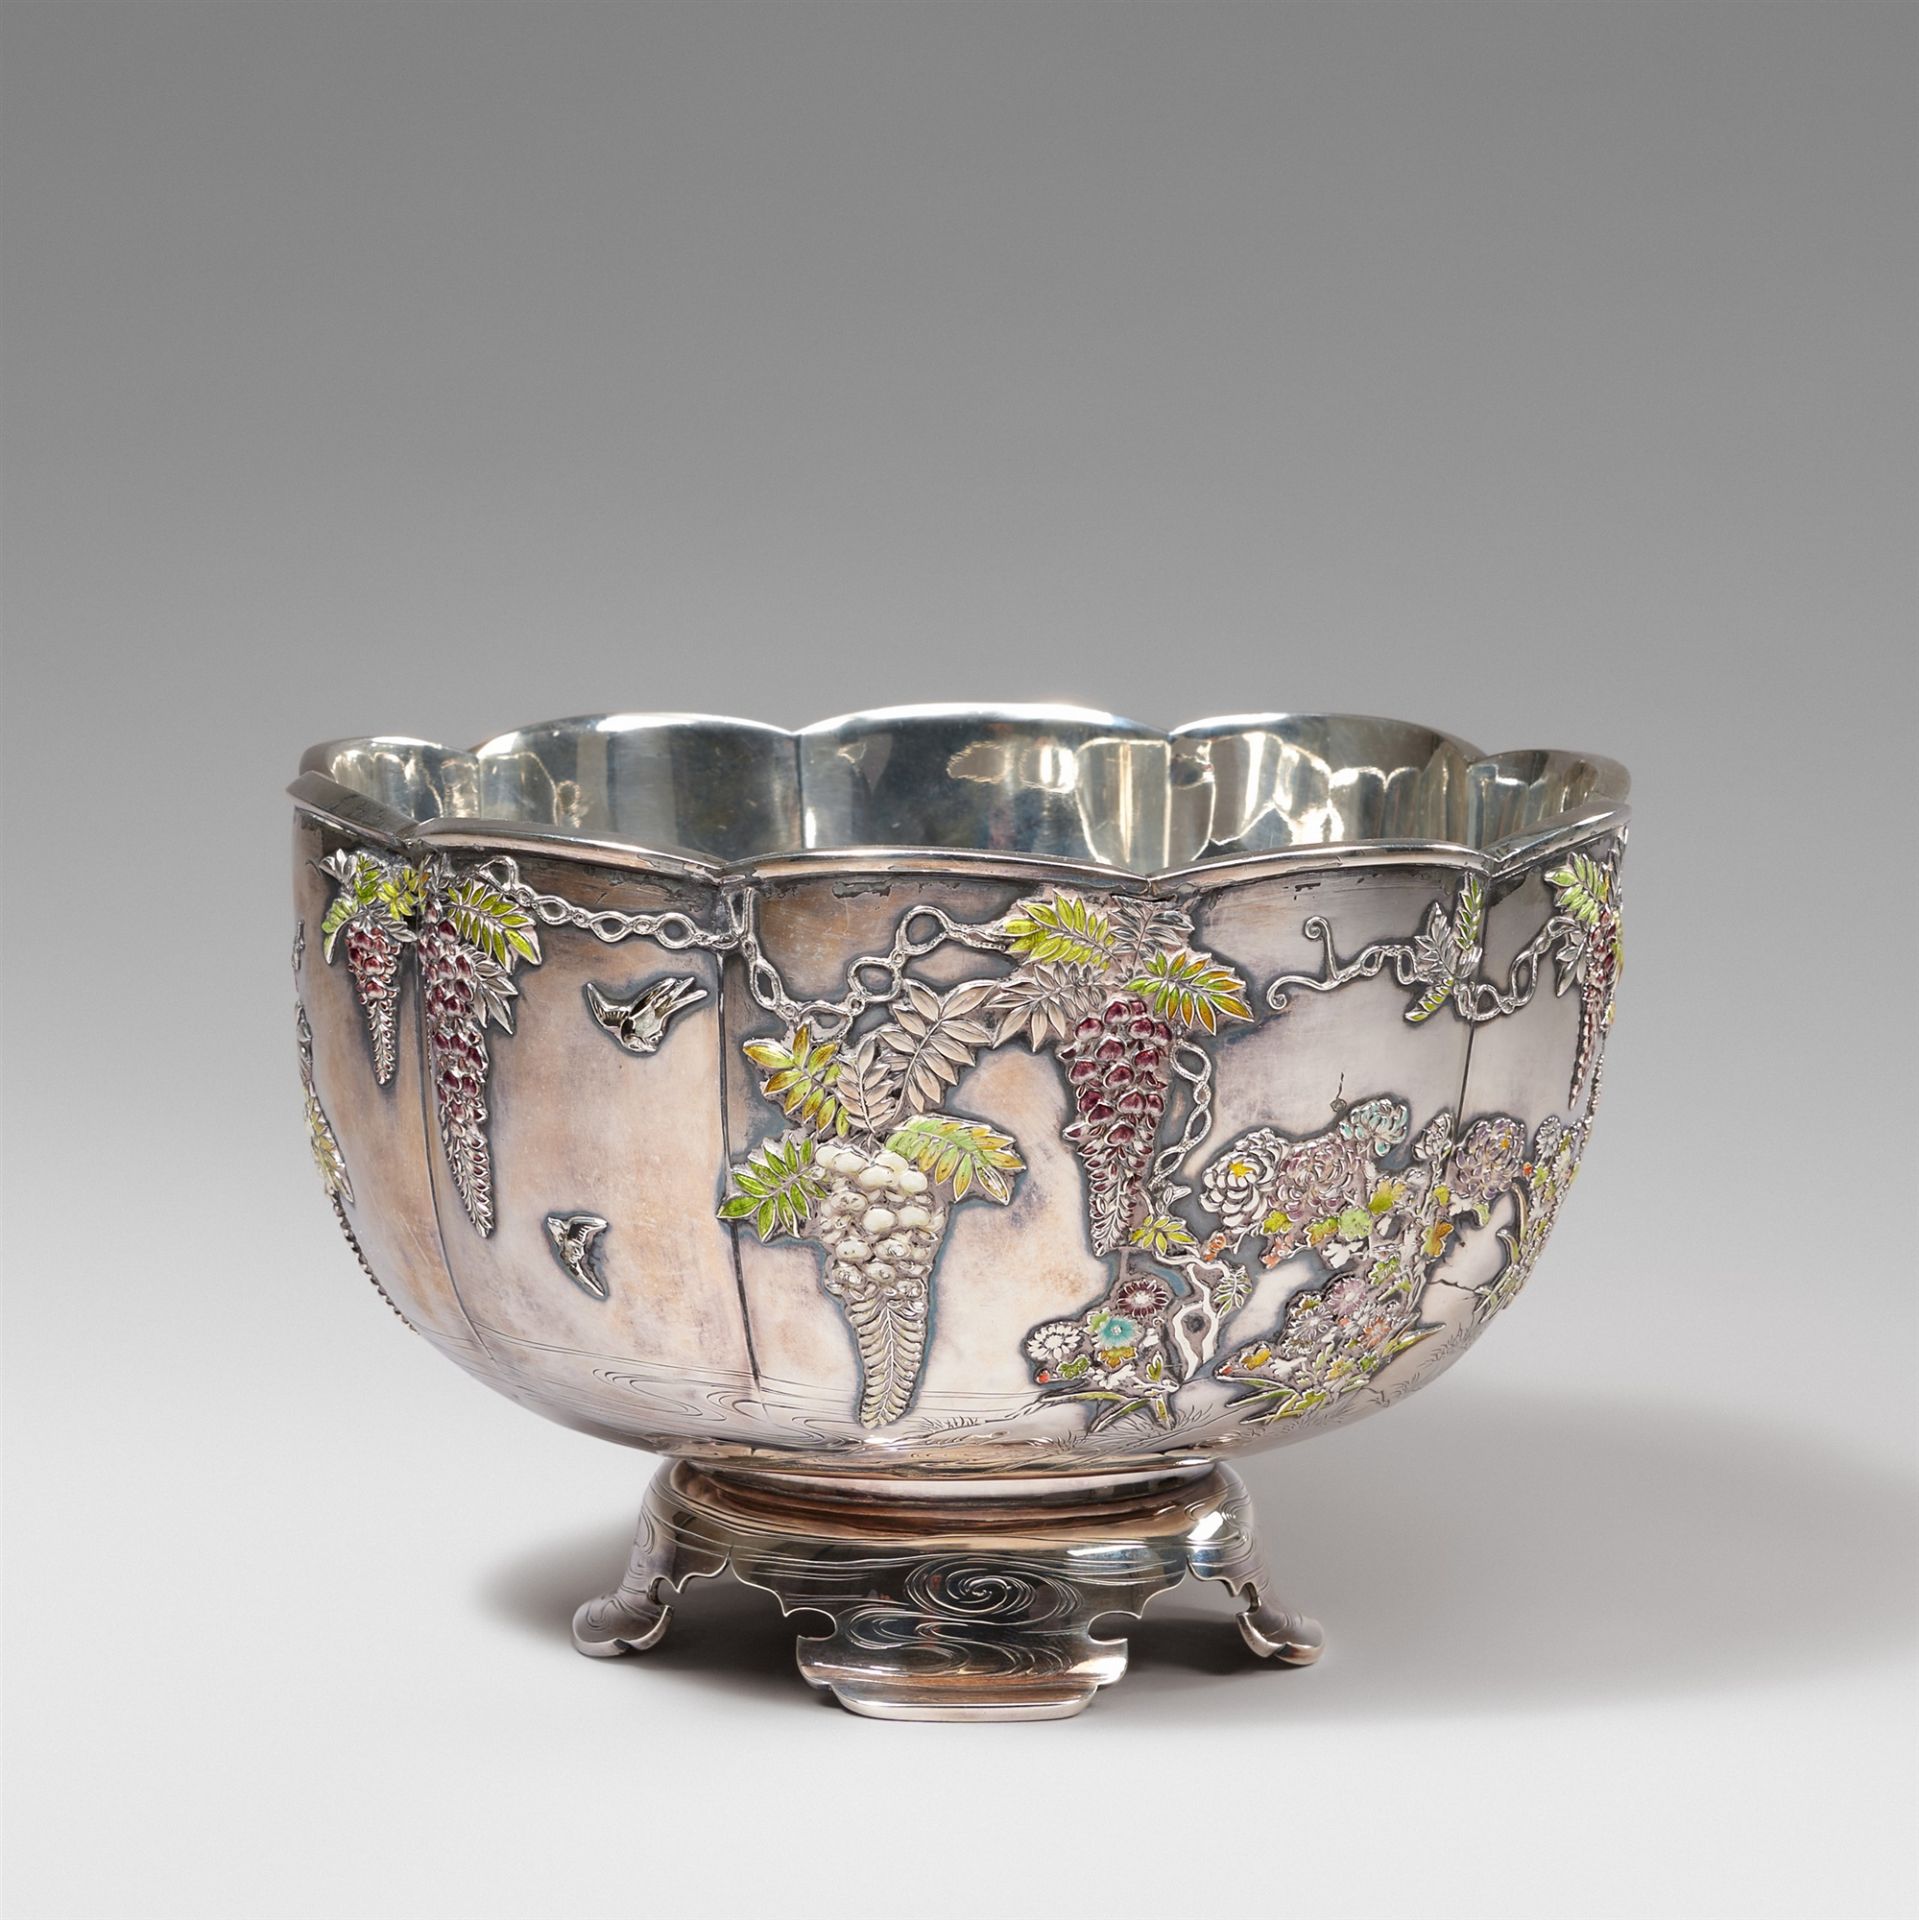 A double-walled silver bowl with translucent enamel. Around 1900